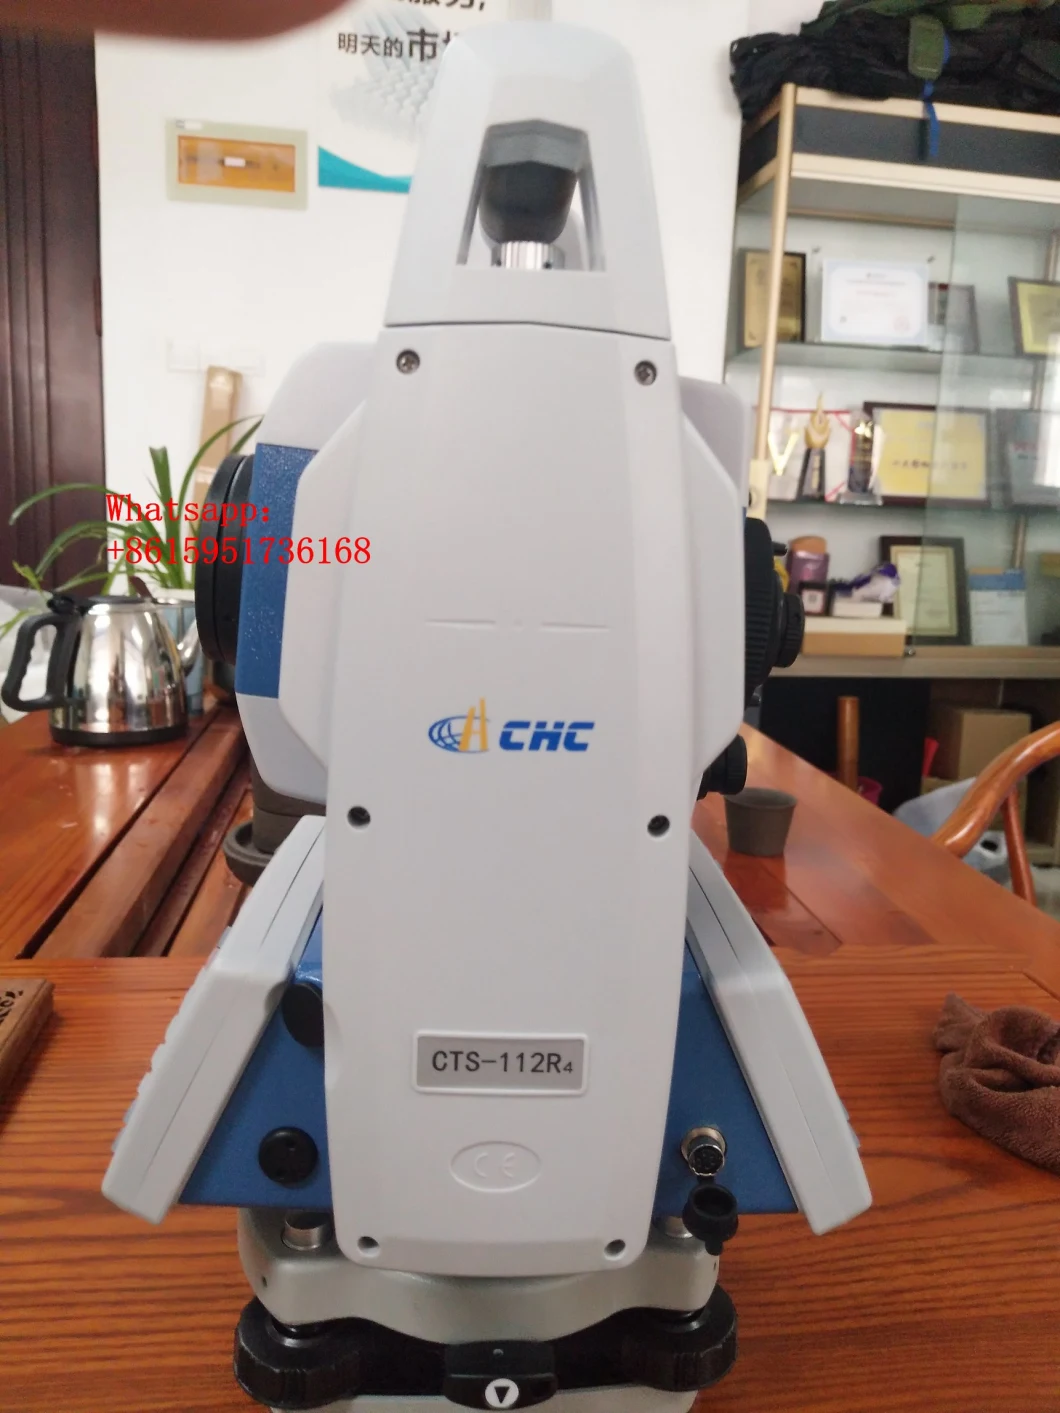 32g Memory Chc Cts-112r4 Total Station for Surveying Work